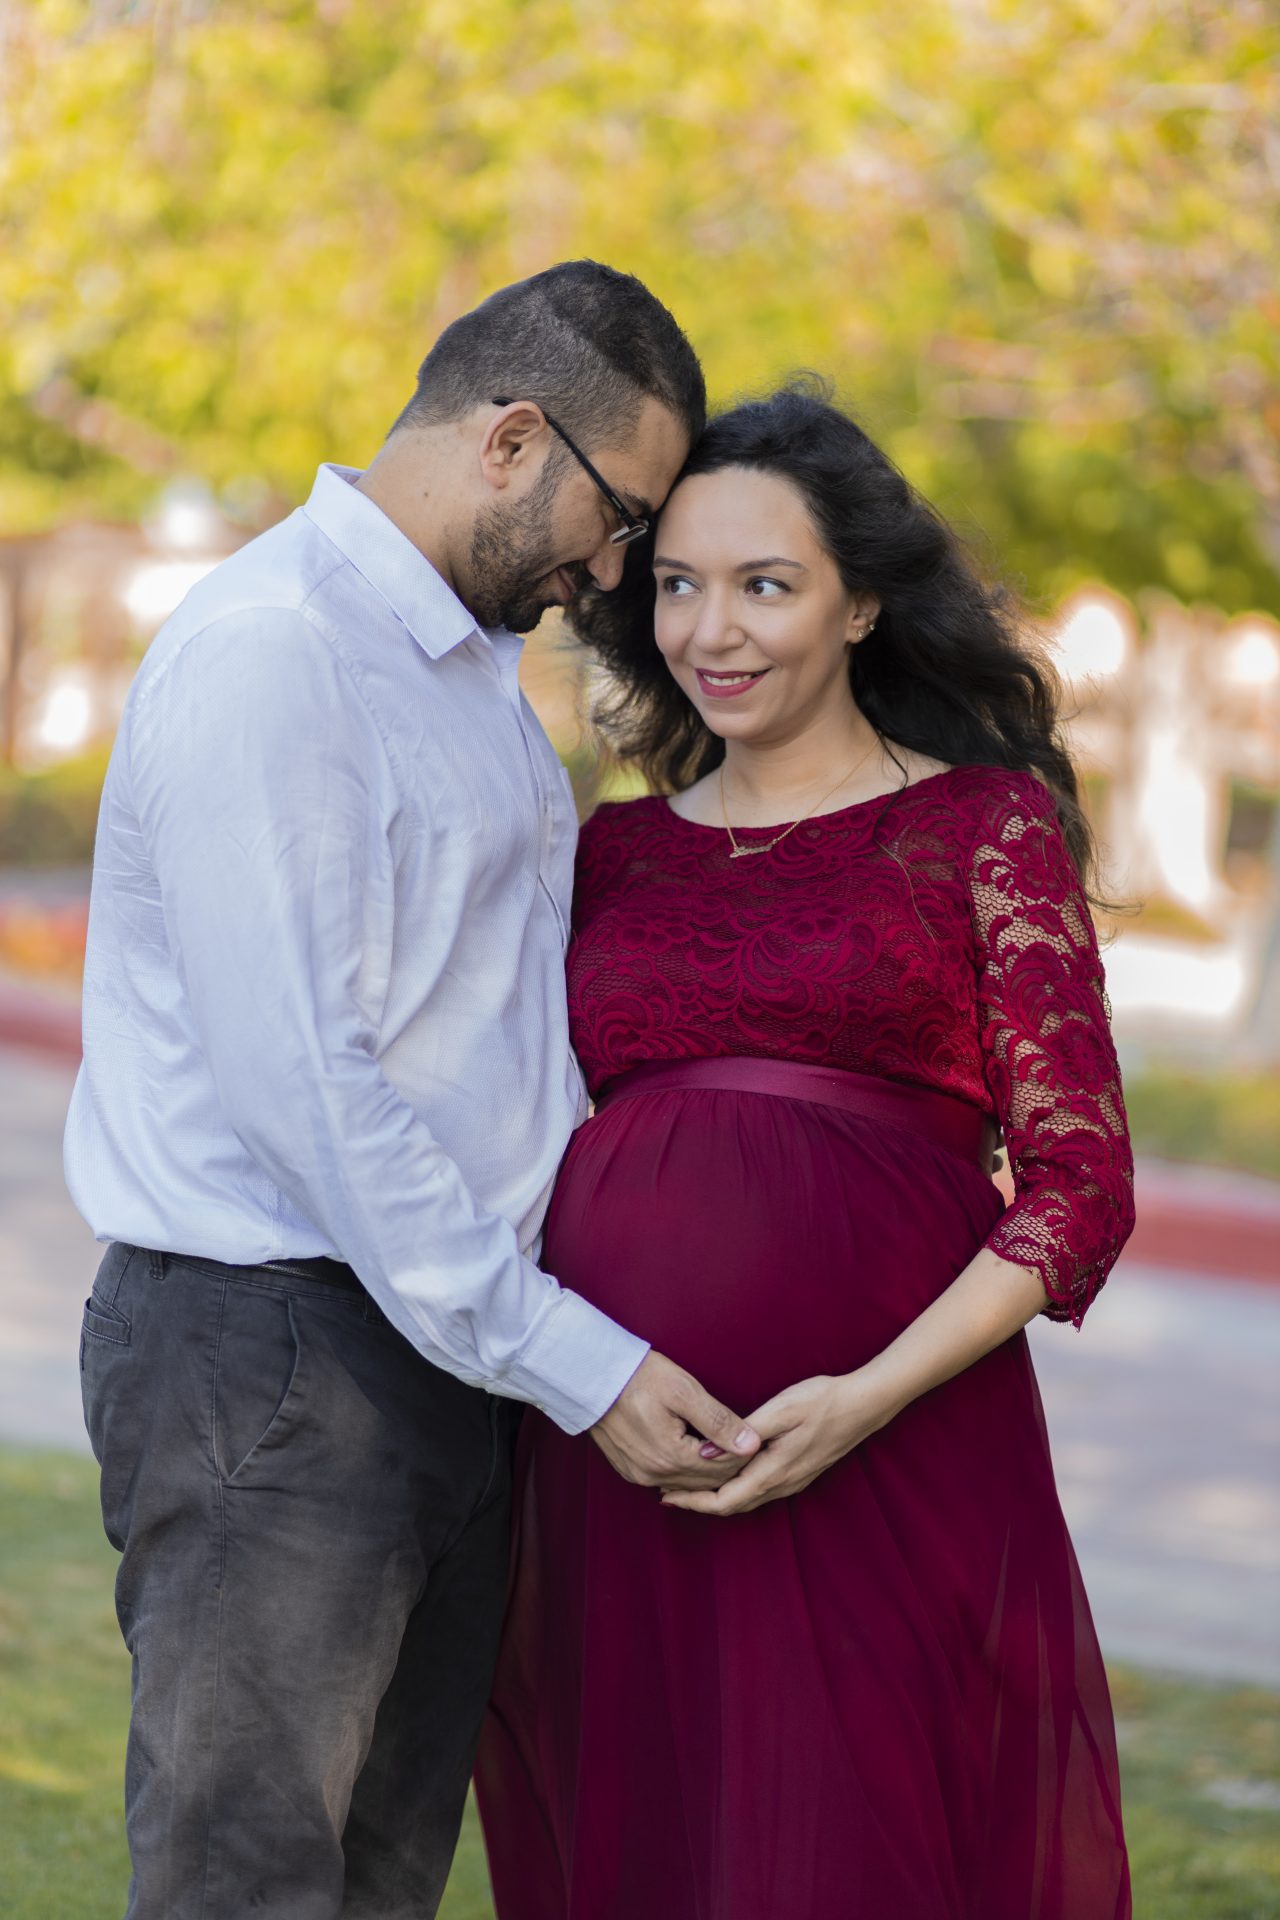 Everything You Need to Know Before Your Maternity Photography Session